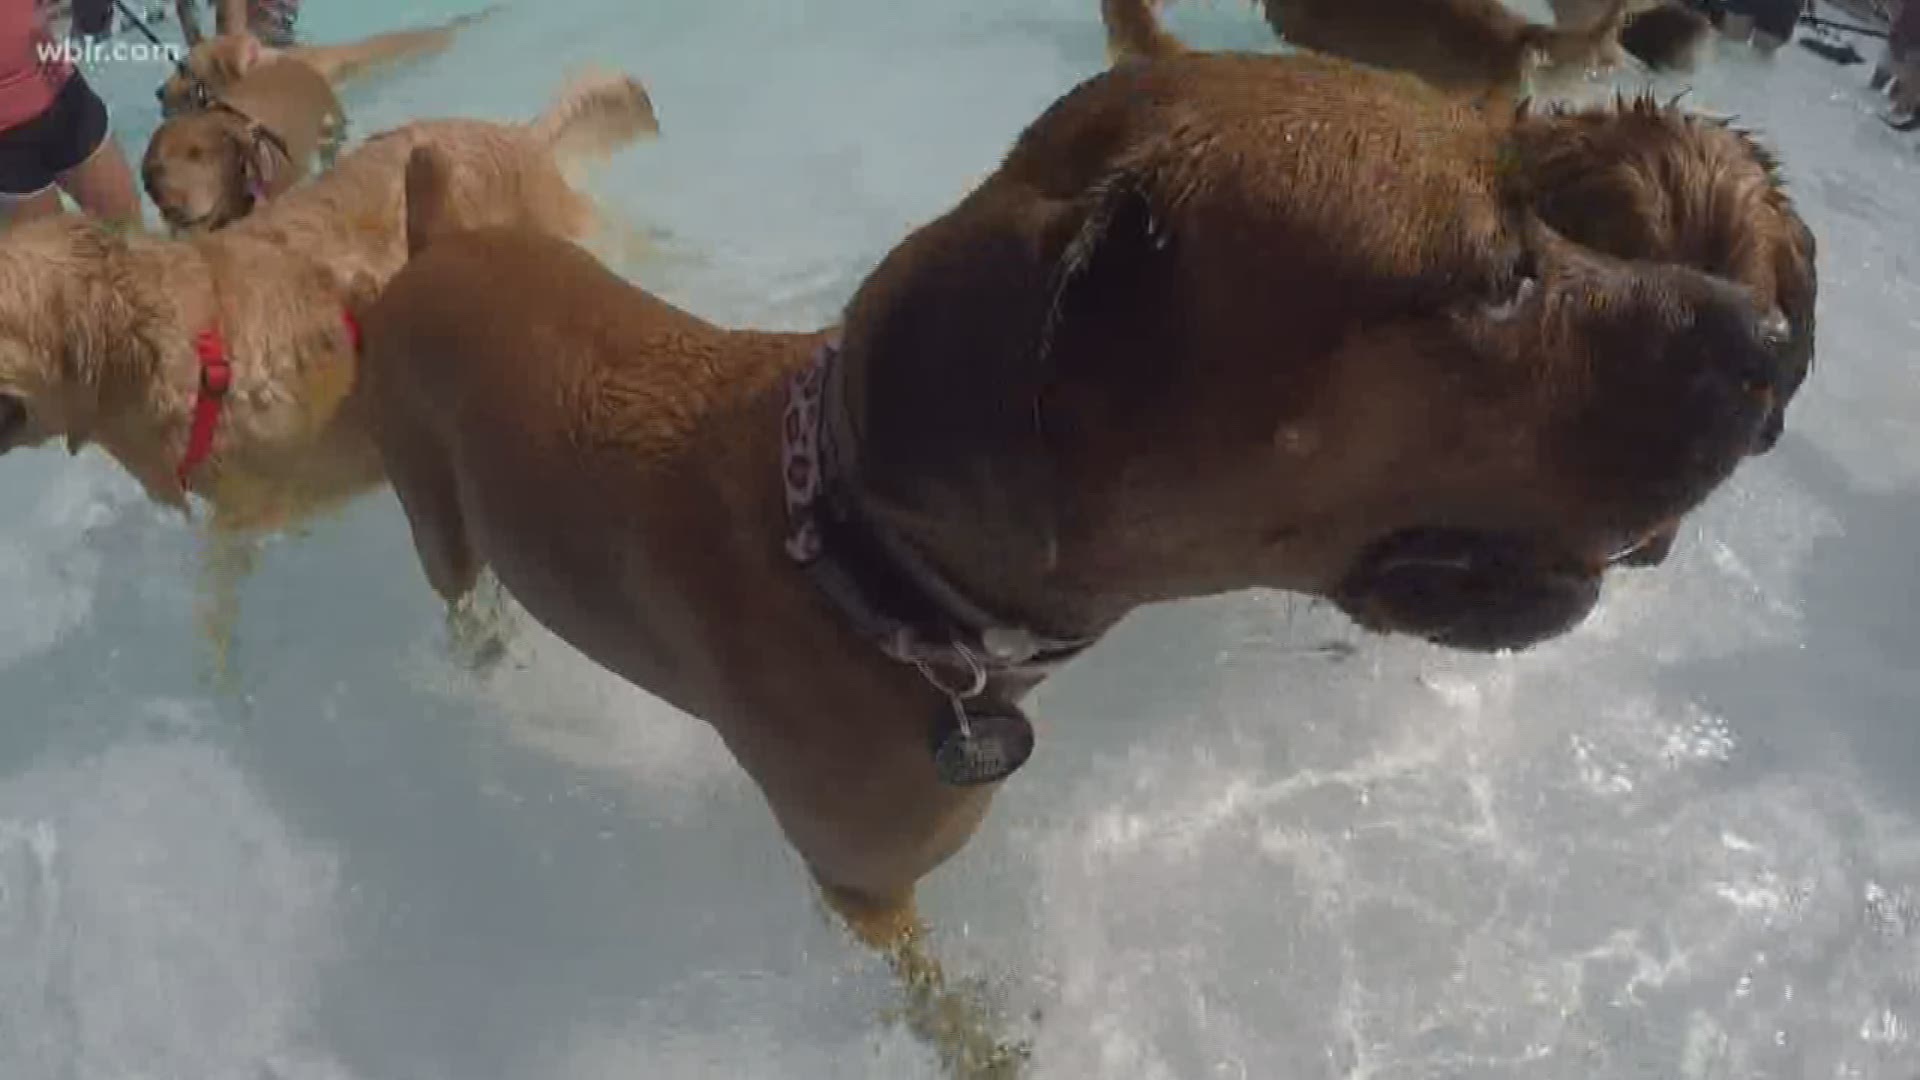 It's their "last hurrah" as the big municipal pool gets ready to close for the season... letting families bring the young doggos along to have fun and cool off.